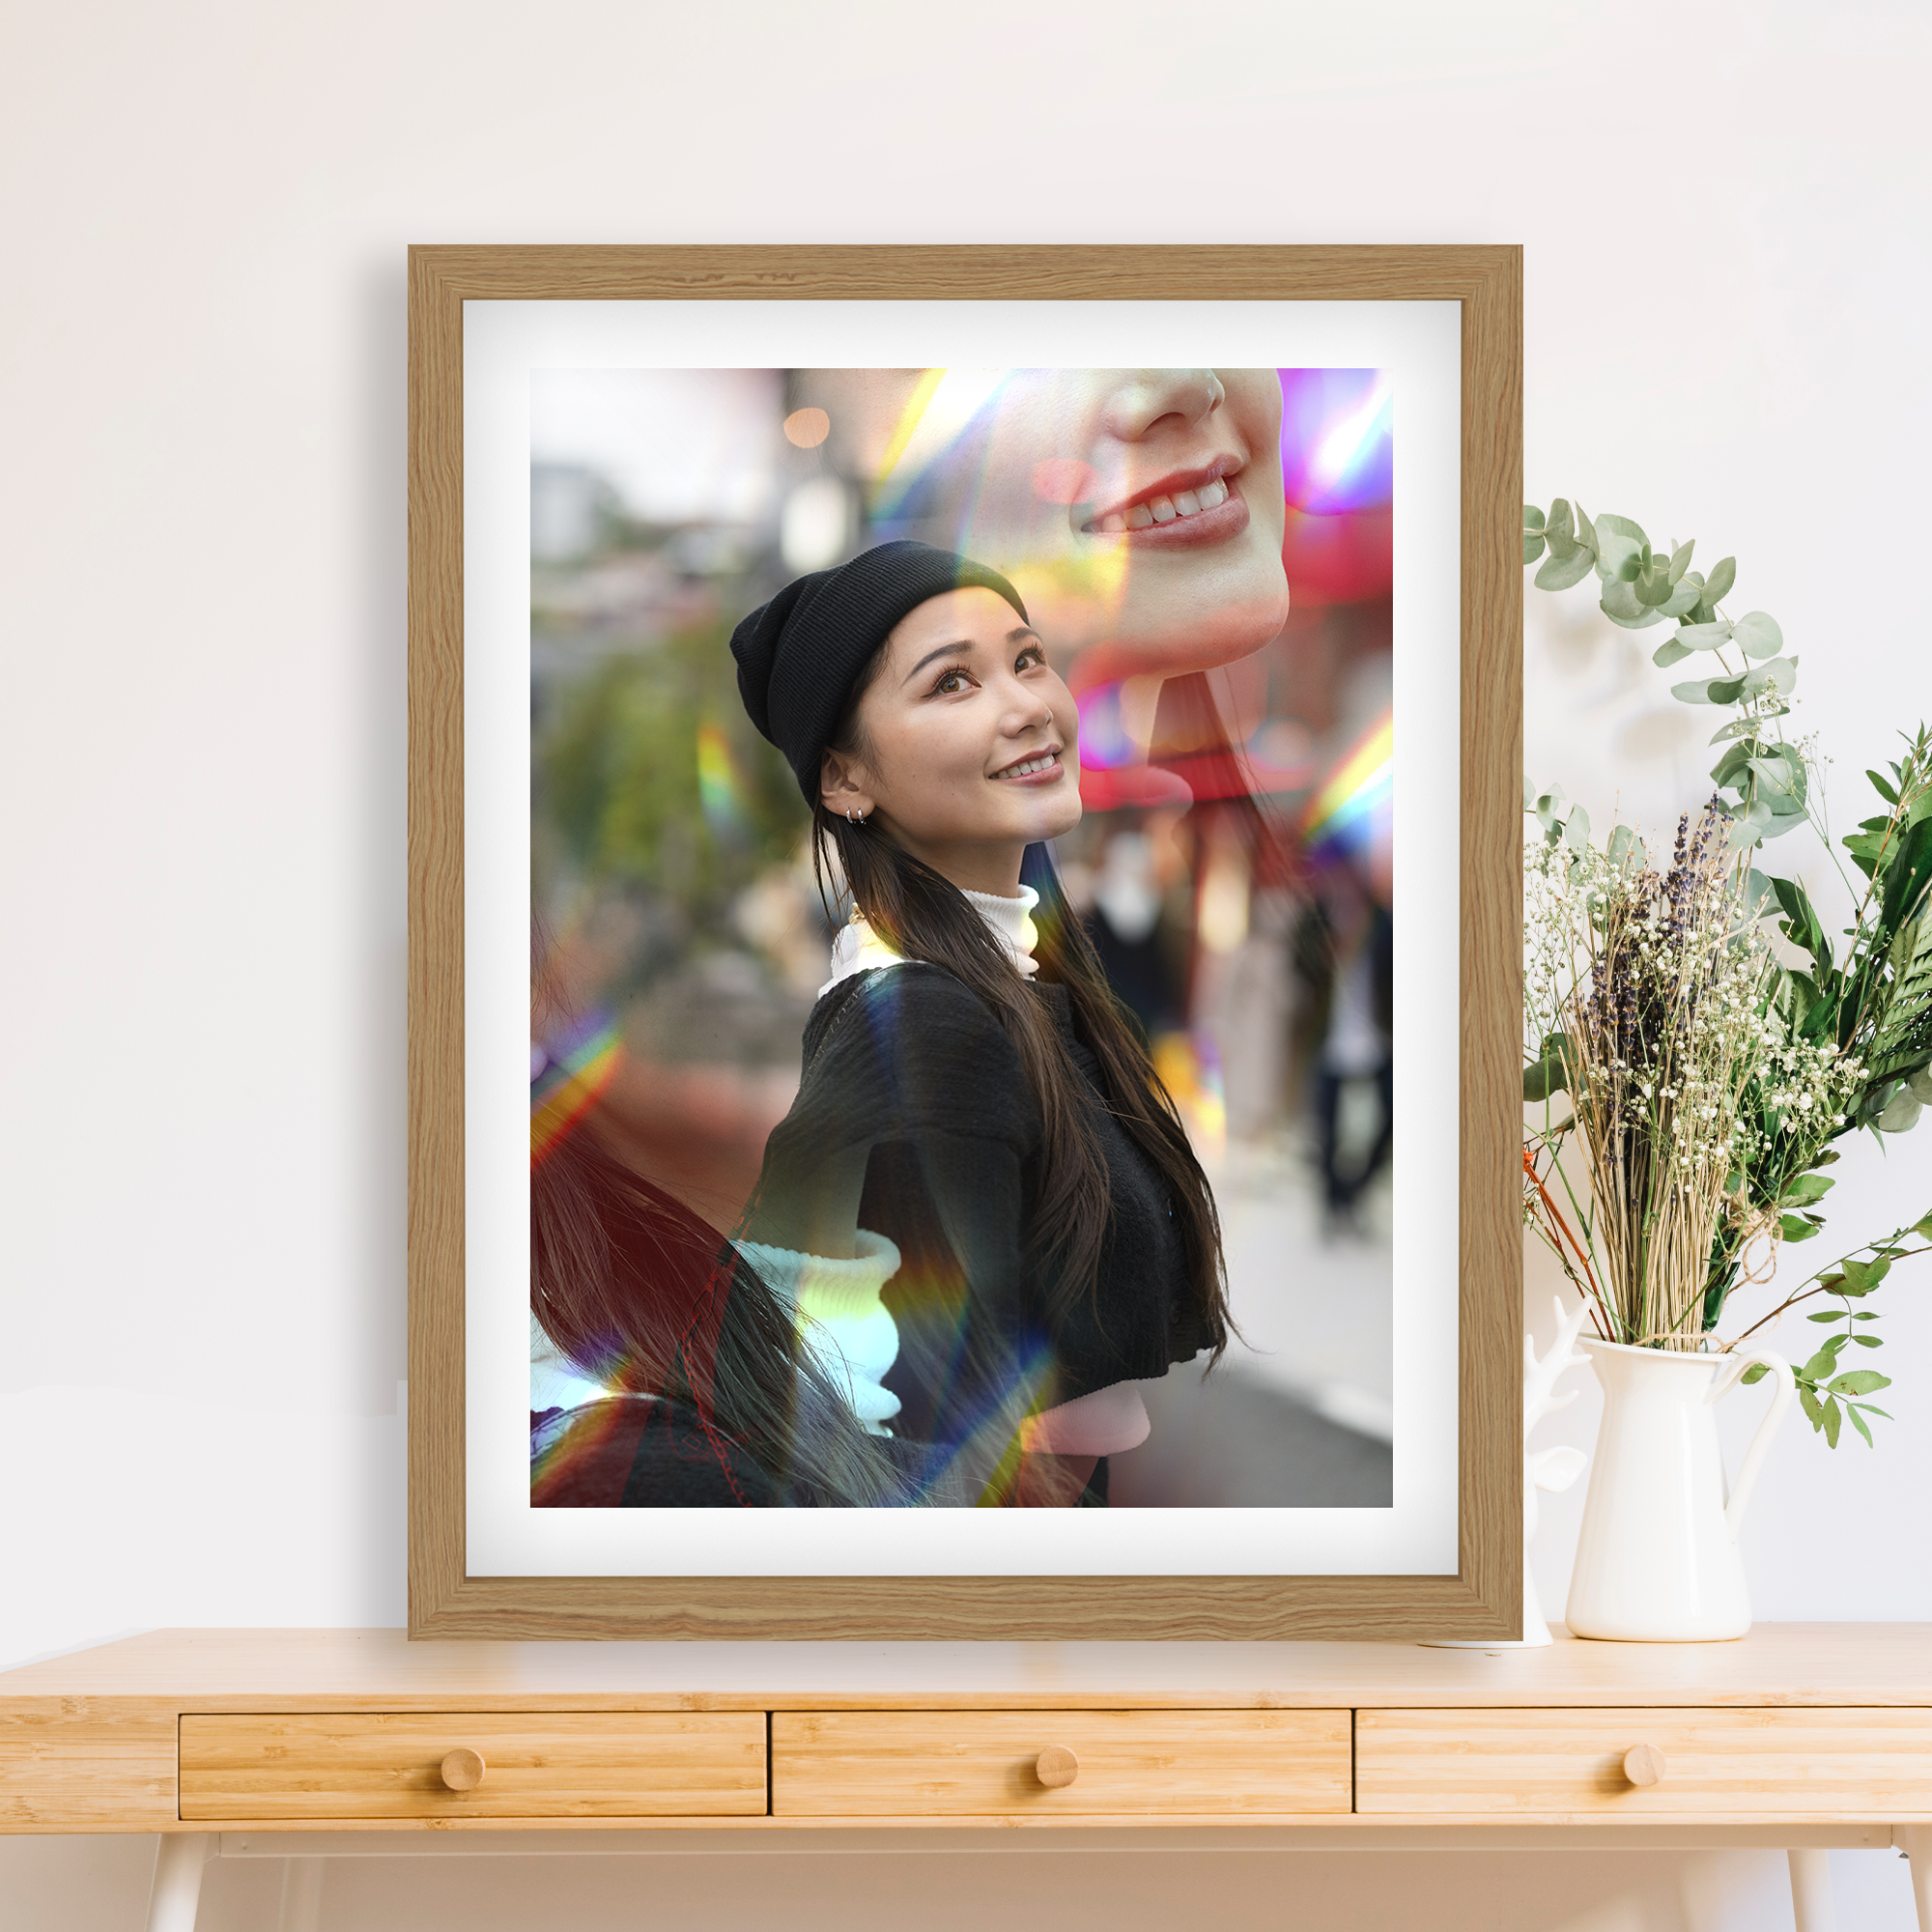 Lens Flares Effect Personalized Poster